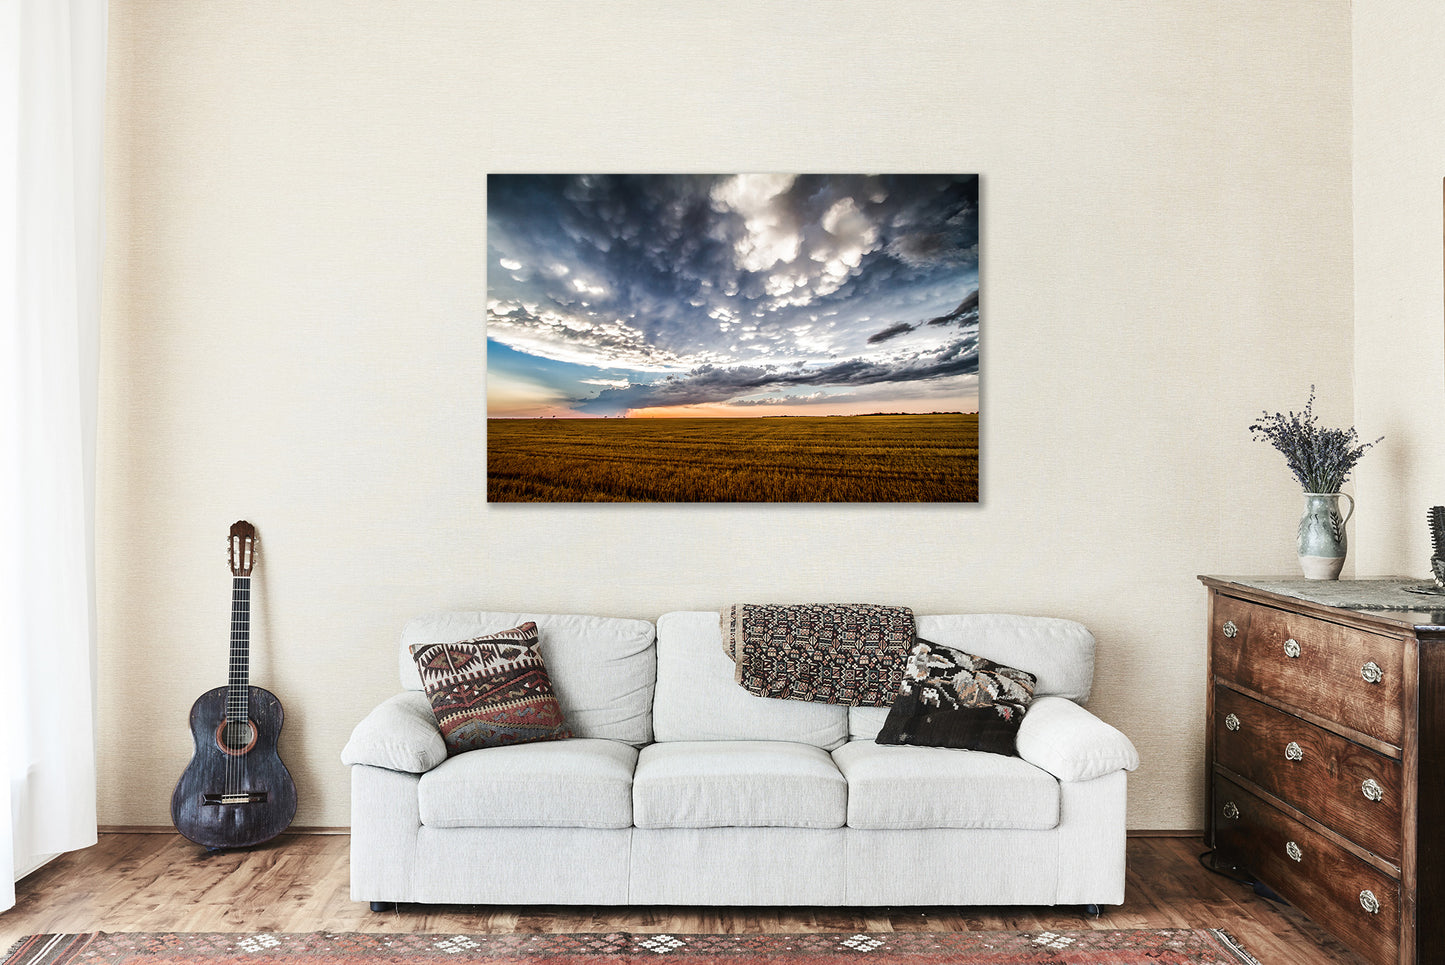 Great Plains Canvas Wall Art (Ready to Hang) Gallery Wrap of Clouds Over Field at Sunset After Stormy Evening in Texas Sky Photography Western Decor